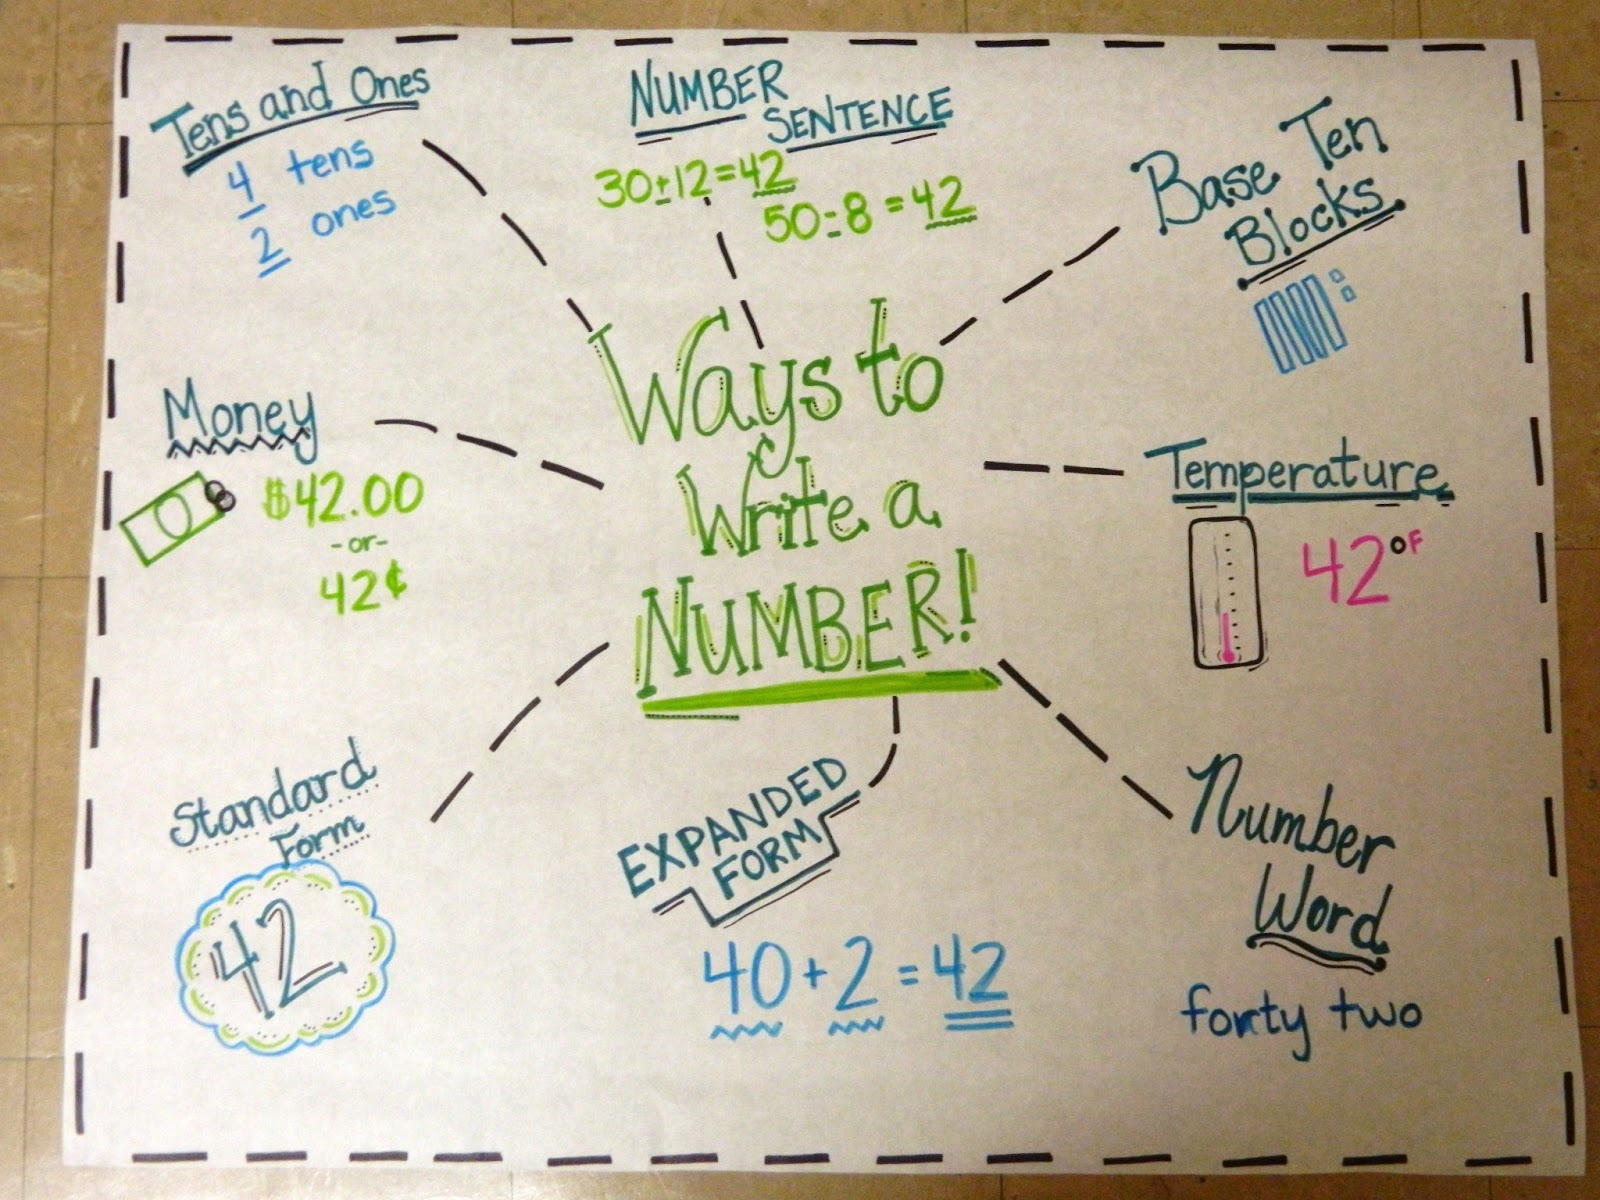 Place Value Anchor Chart 5th Grade